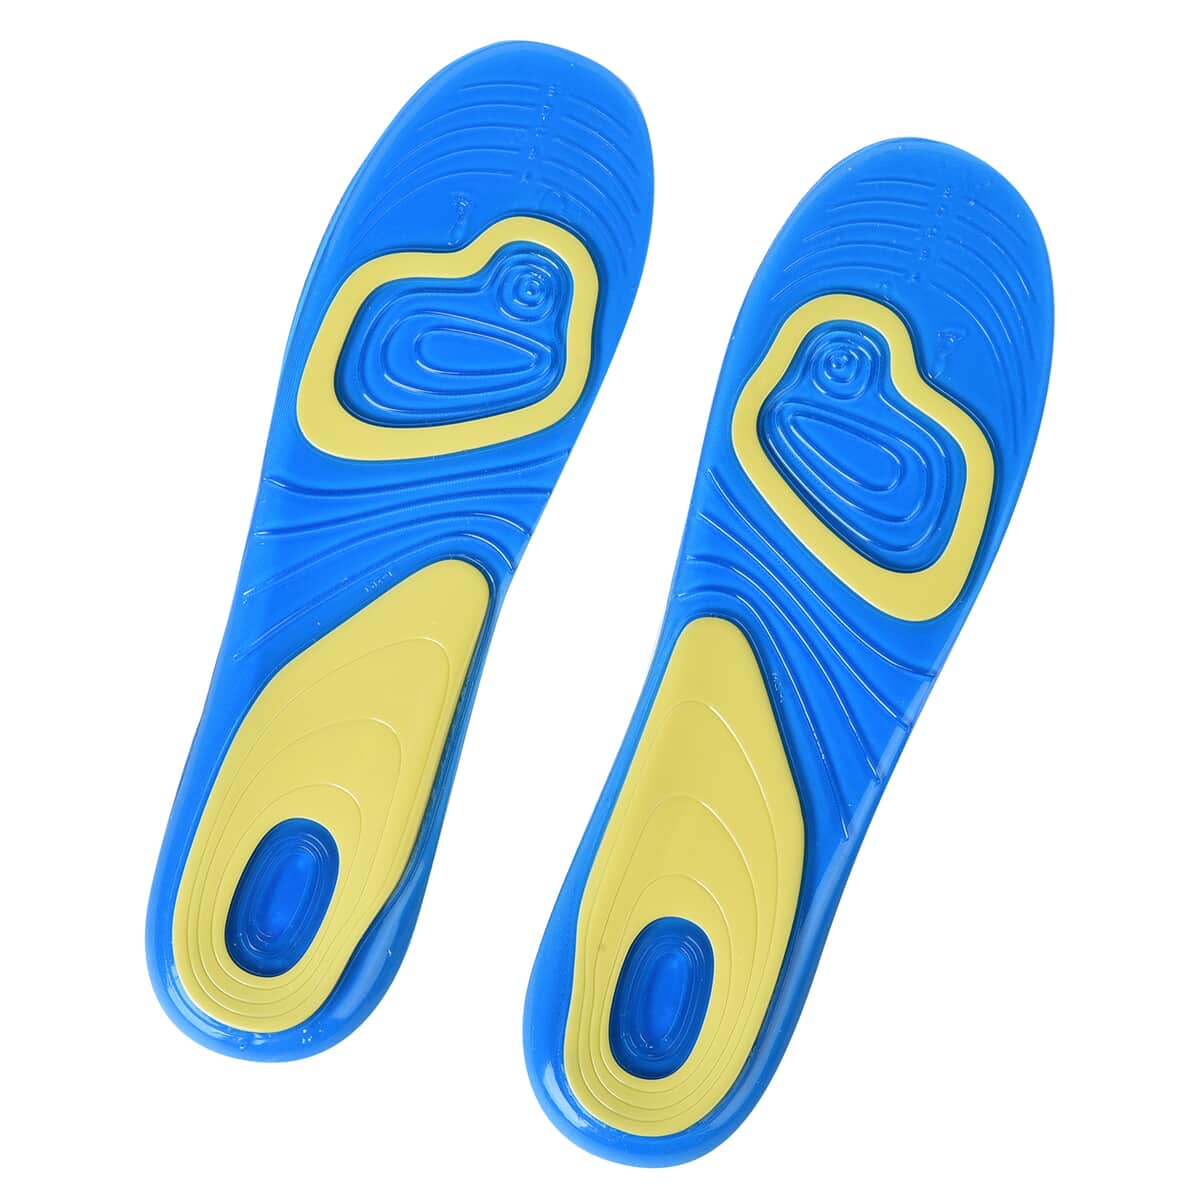 Anti Fatigue Athletic Running Work Shoe Gel Insoles for Men's - Blue & Yellow, Fits Mens Shoe Sizes 9 to 13 image number 0